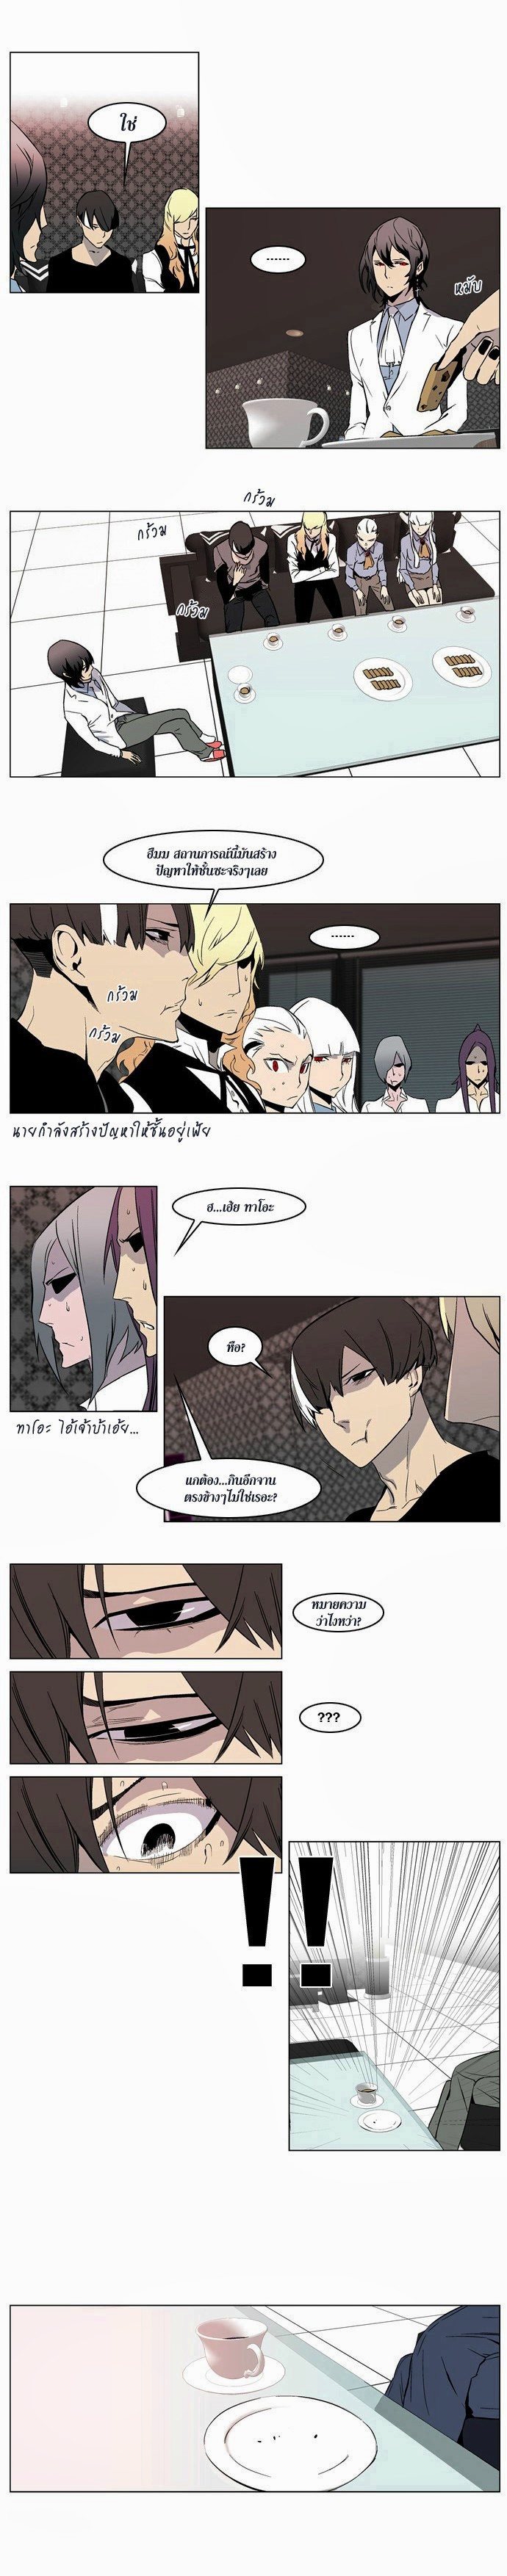 Noblesse 211 005